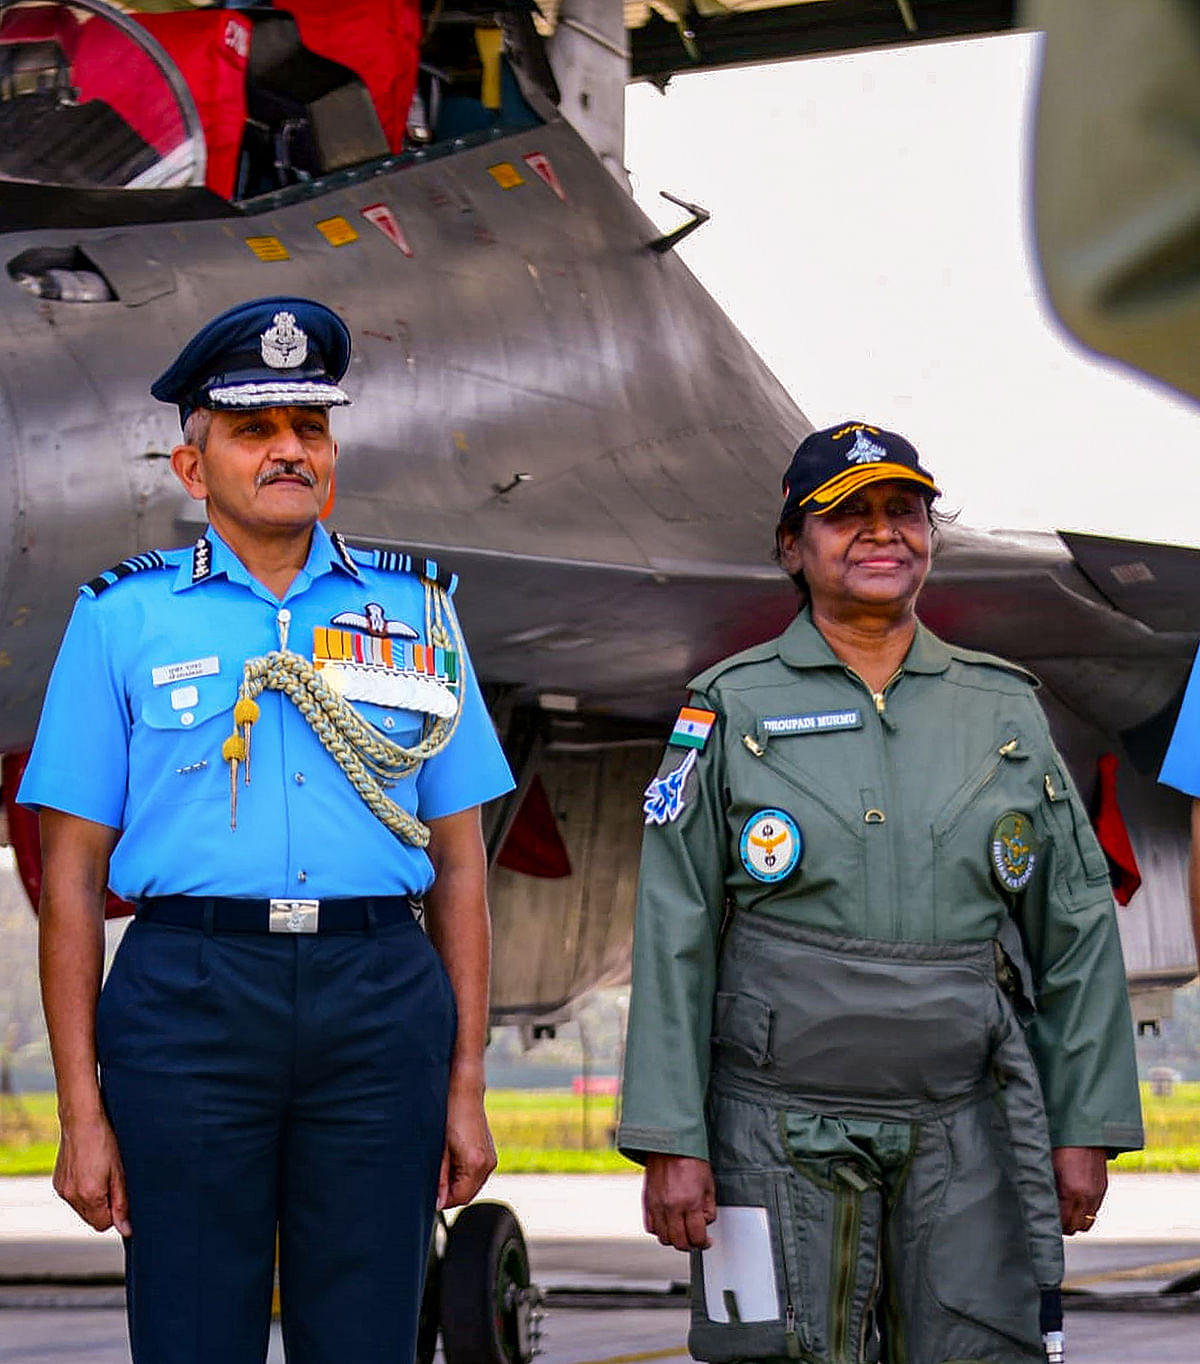 President Murmu is the third President after APJ Abdul Kalam and Pratibha Patil to undertake such a sortie.